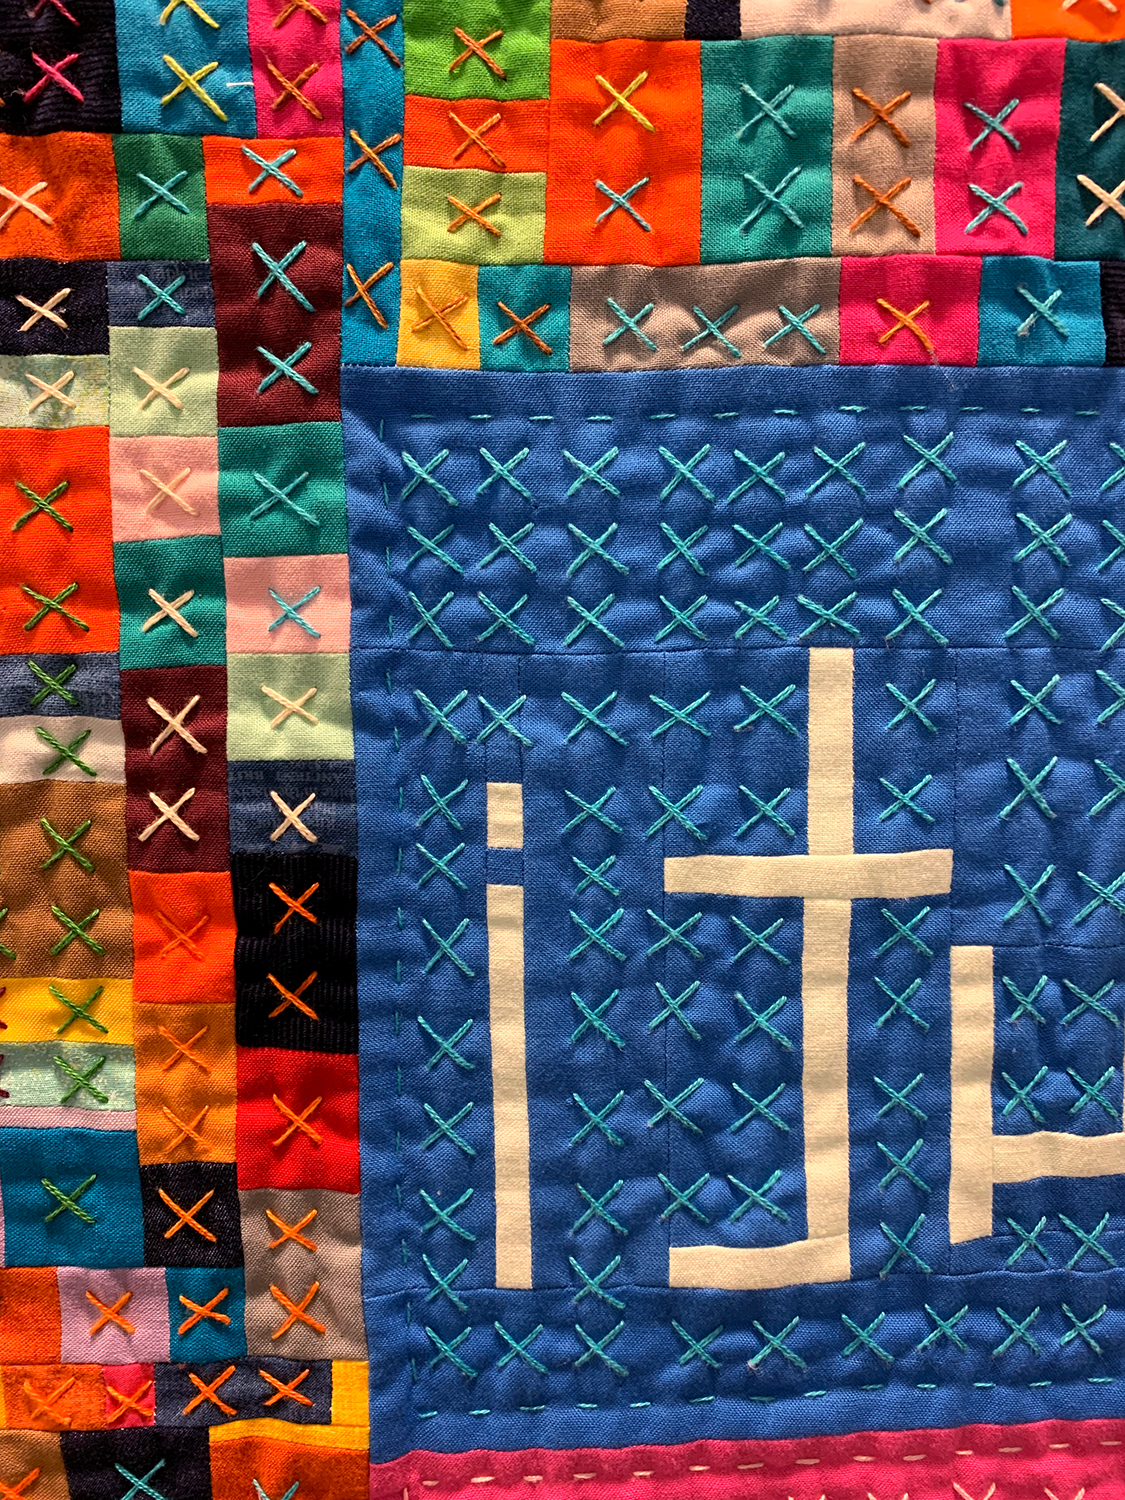 detail of colorful modern quilt with the words "uoy evol i tub" in the lower right corner